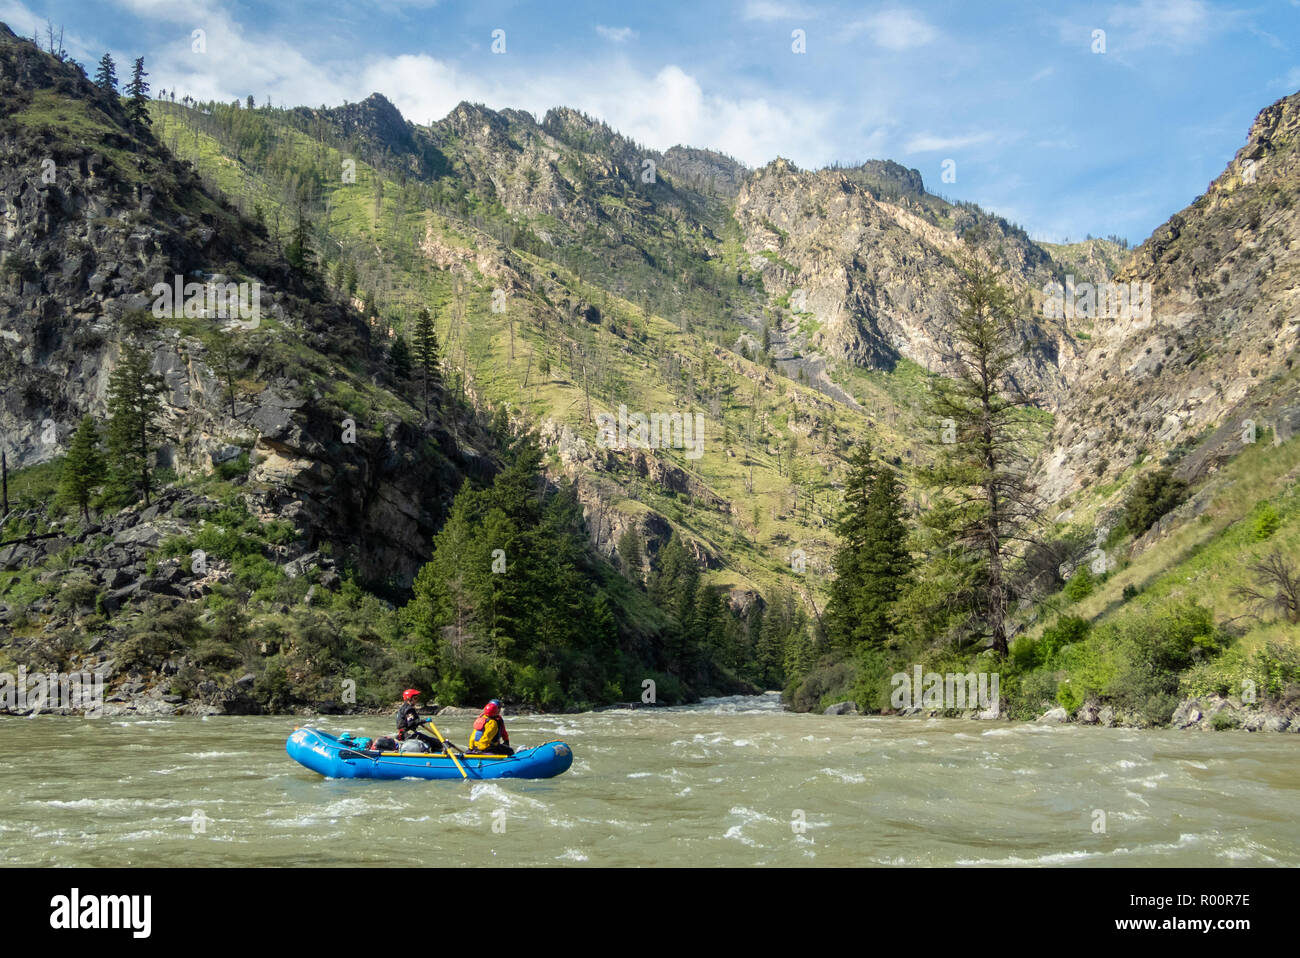 Middle Fork Salmon River, Idaho, whitewater rafting, Far and Away Adventures, Wild and Scenic River, Frank Church River of No Return Wilderness, Salmo Stock Photo